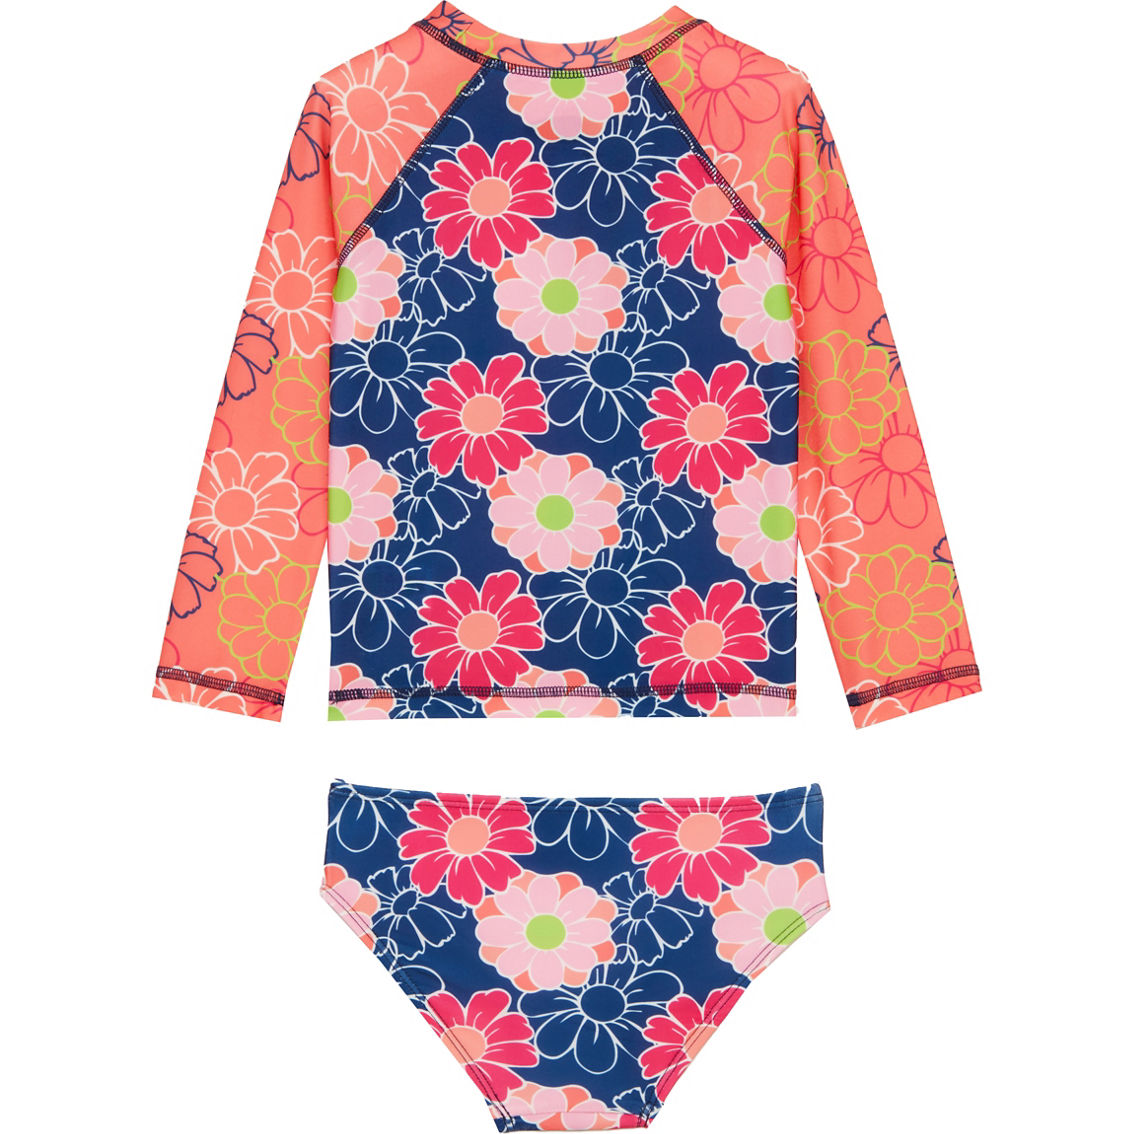 Surf Zone Baby Girls Floral 2 pc. Swimsuit - Image 2 of 2